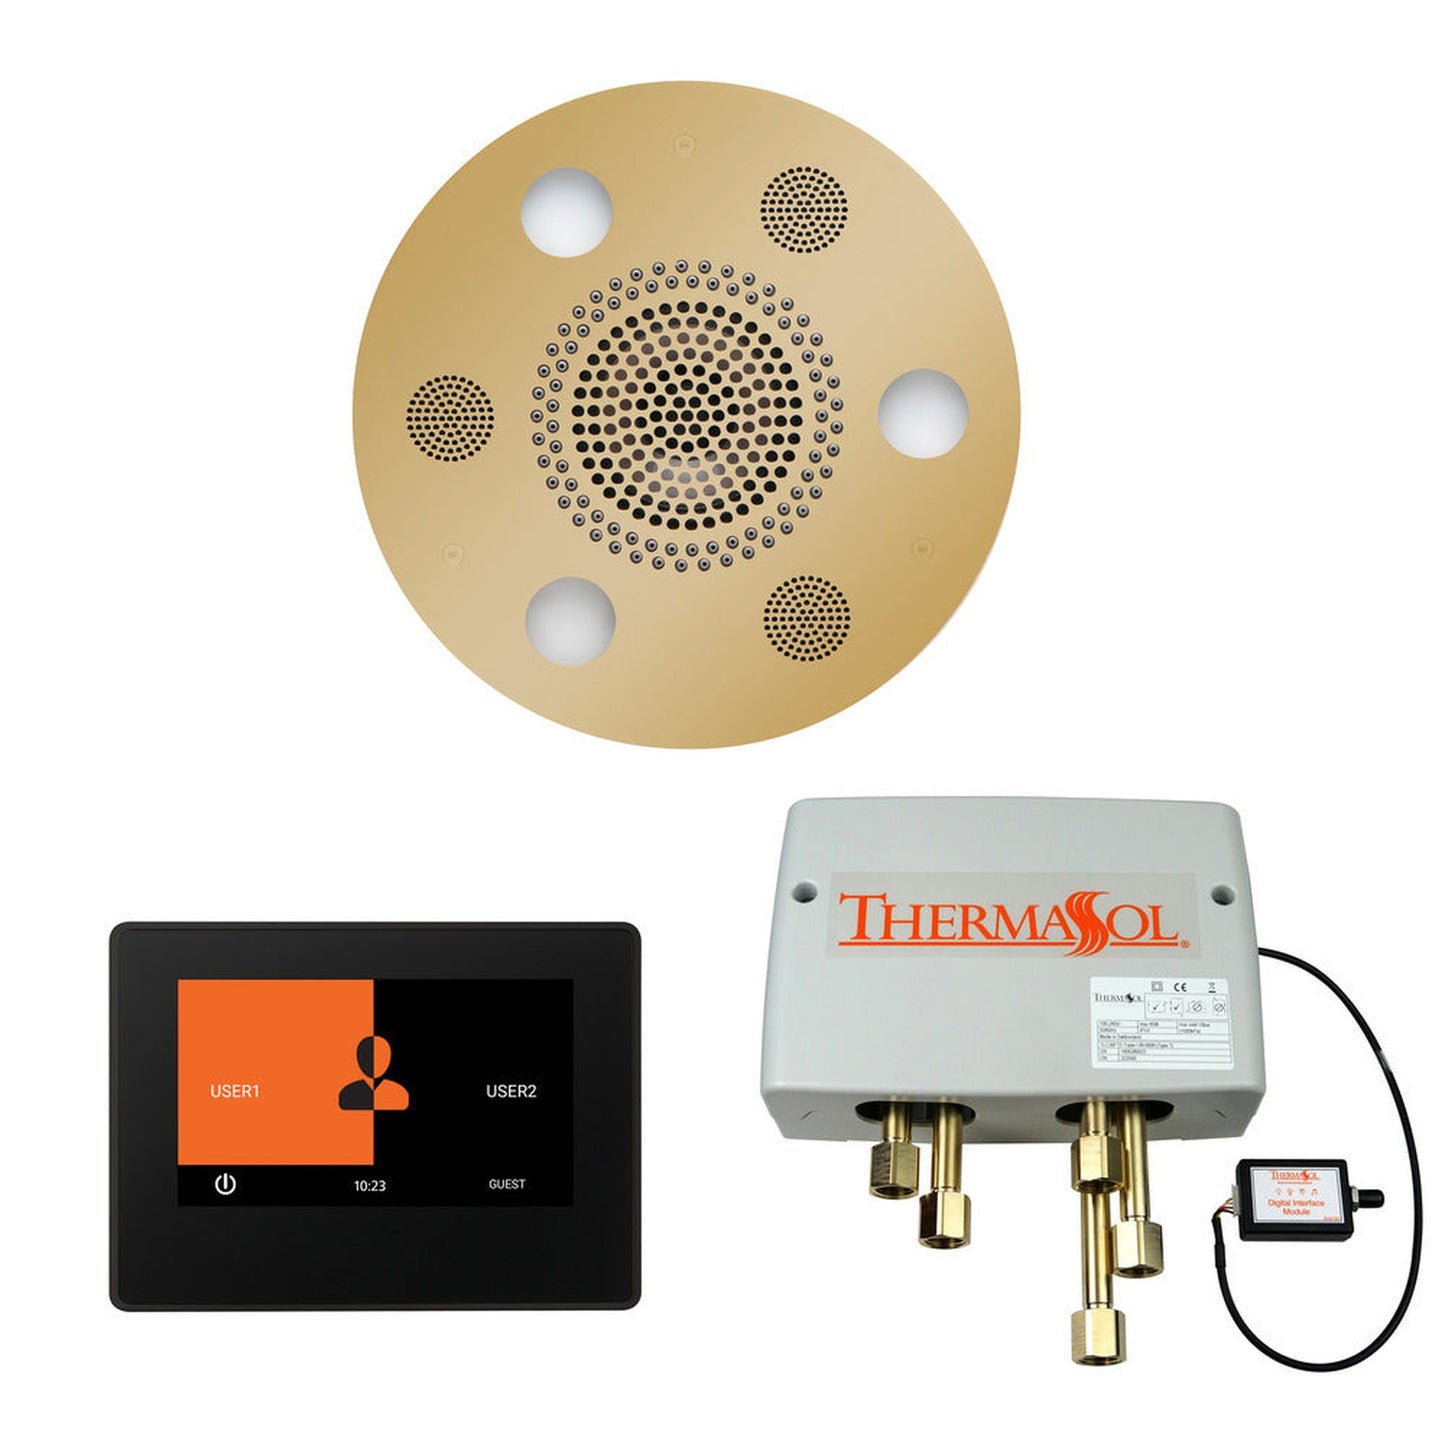 ThermaSol The Wellness Polished Brass Finish Serenity Advancedd Round Shower Package with 7" ThermaTouch